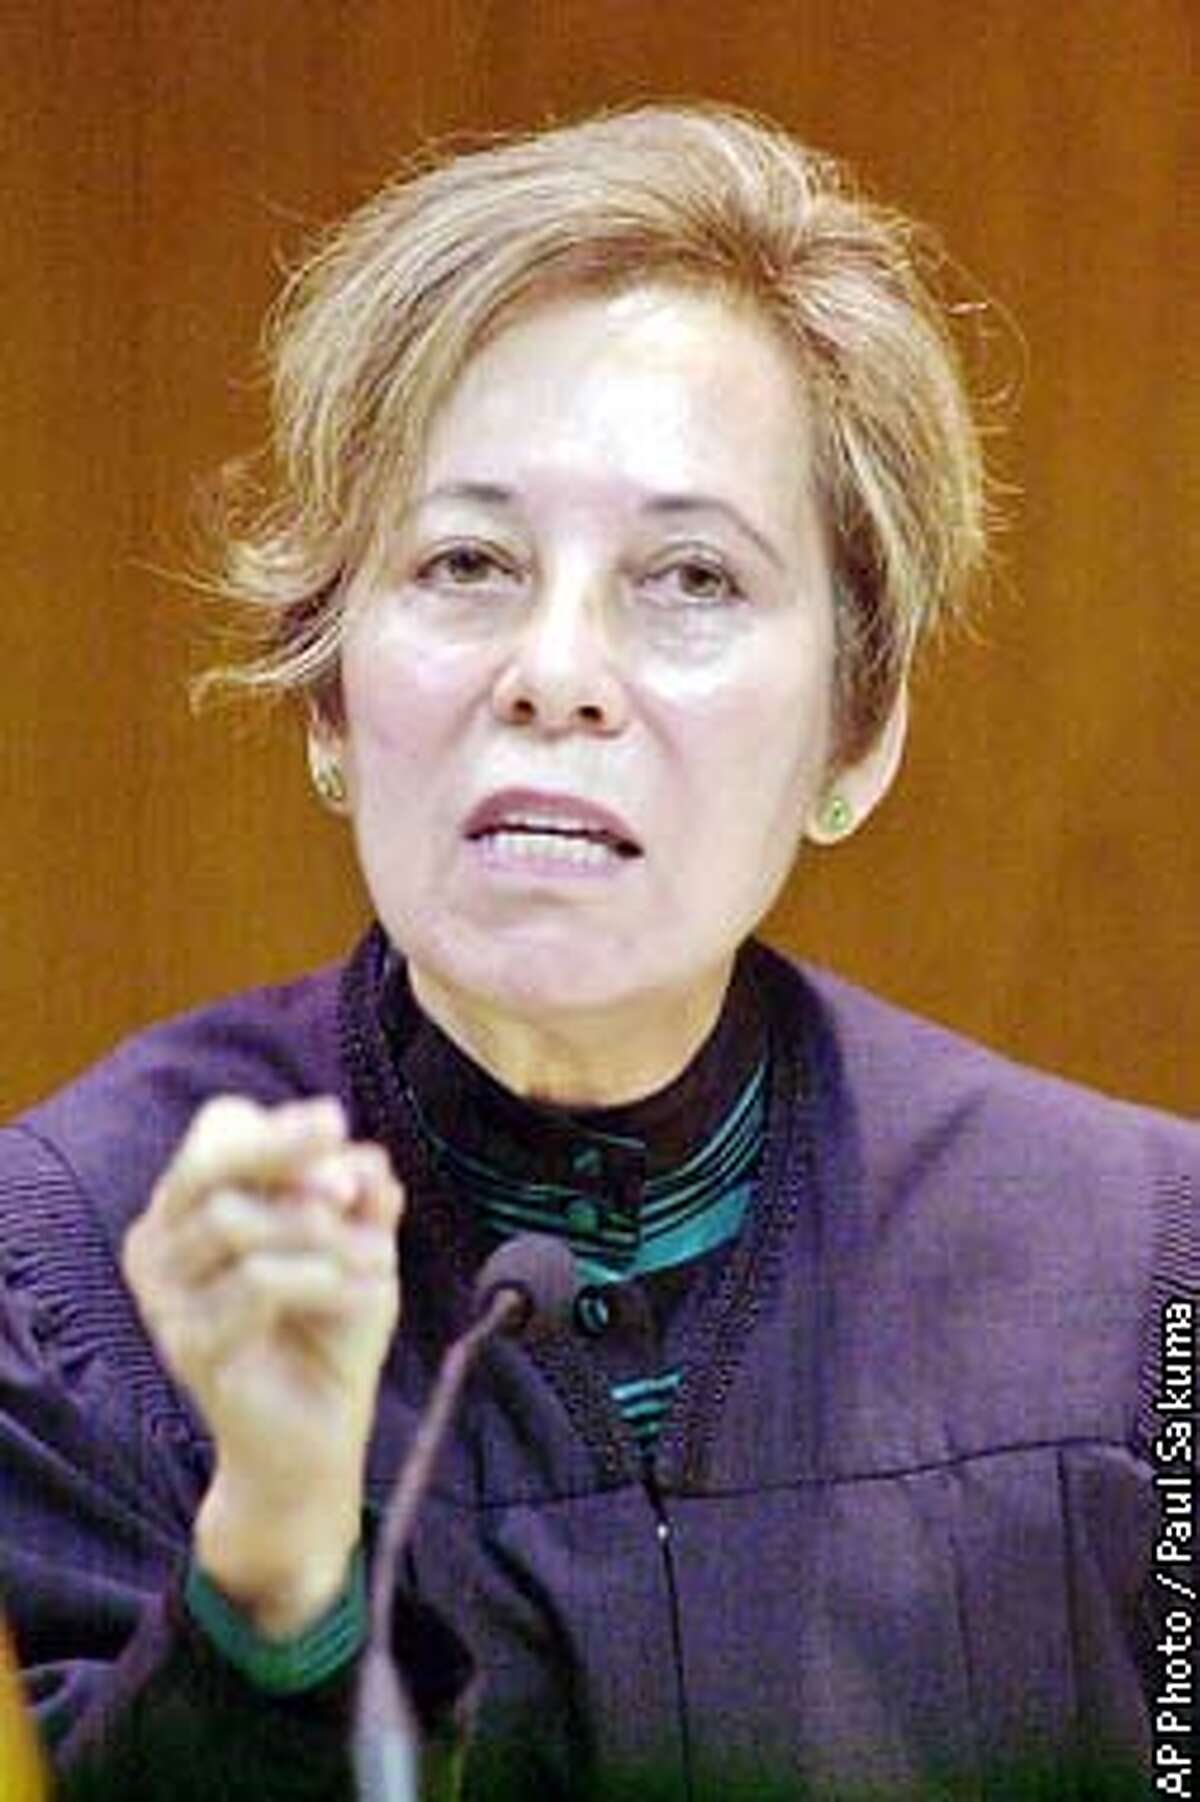 California Supreme Court Justice Joyce Kennard gestures in a courtroom in Fresno, Calif., Tuesday, Oct. 8, 2002. The court begins considering whether the governor has absolute power to overturn the Board of Prison Terms position to parole convicted murderers. (AP Photo/Paul Sakuma)